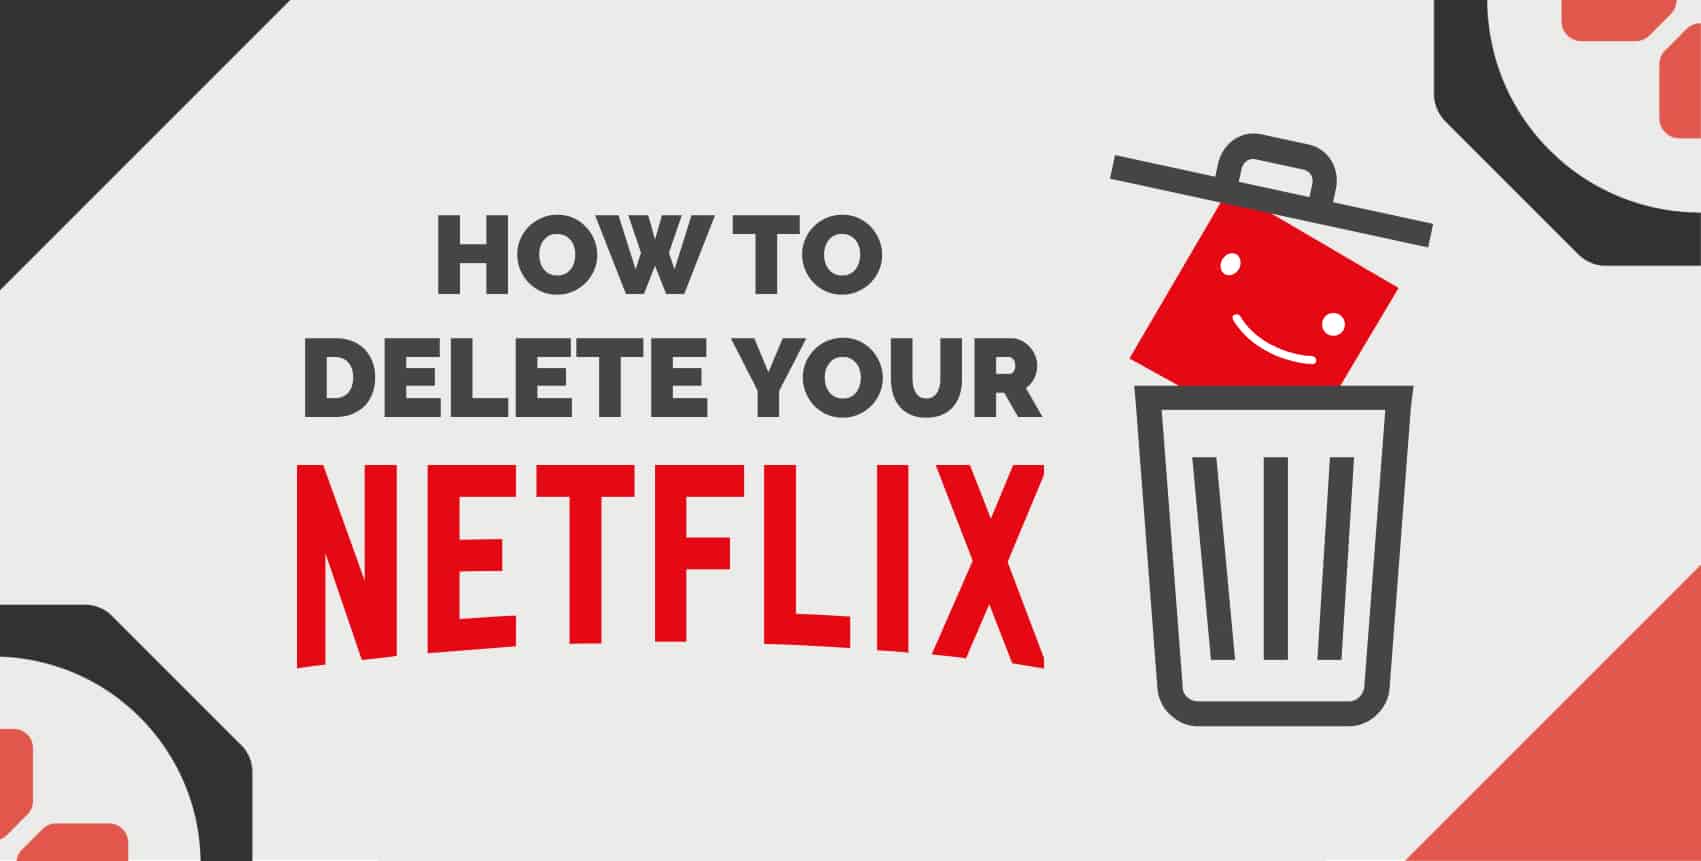 How to Delete Your Netflix Account In Under 14 Minutes